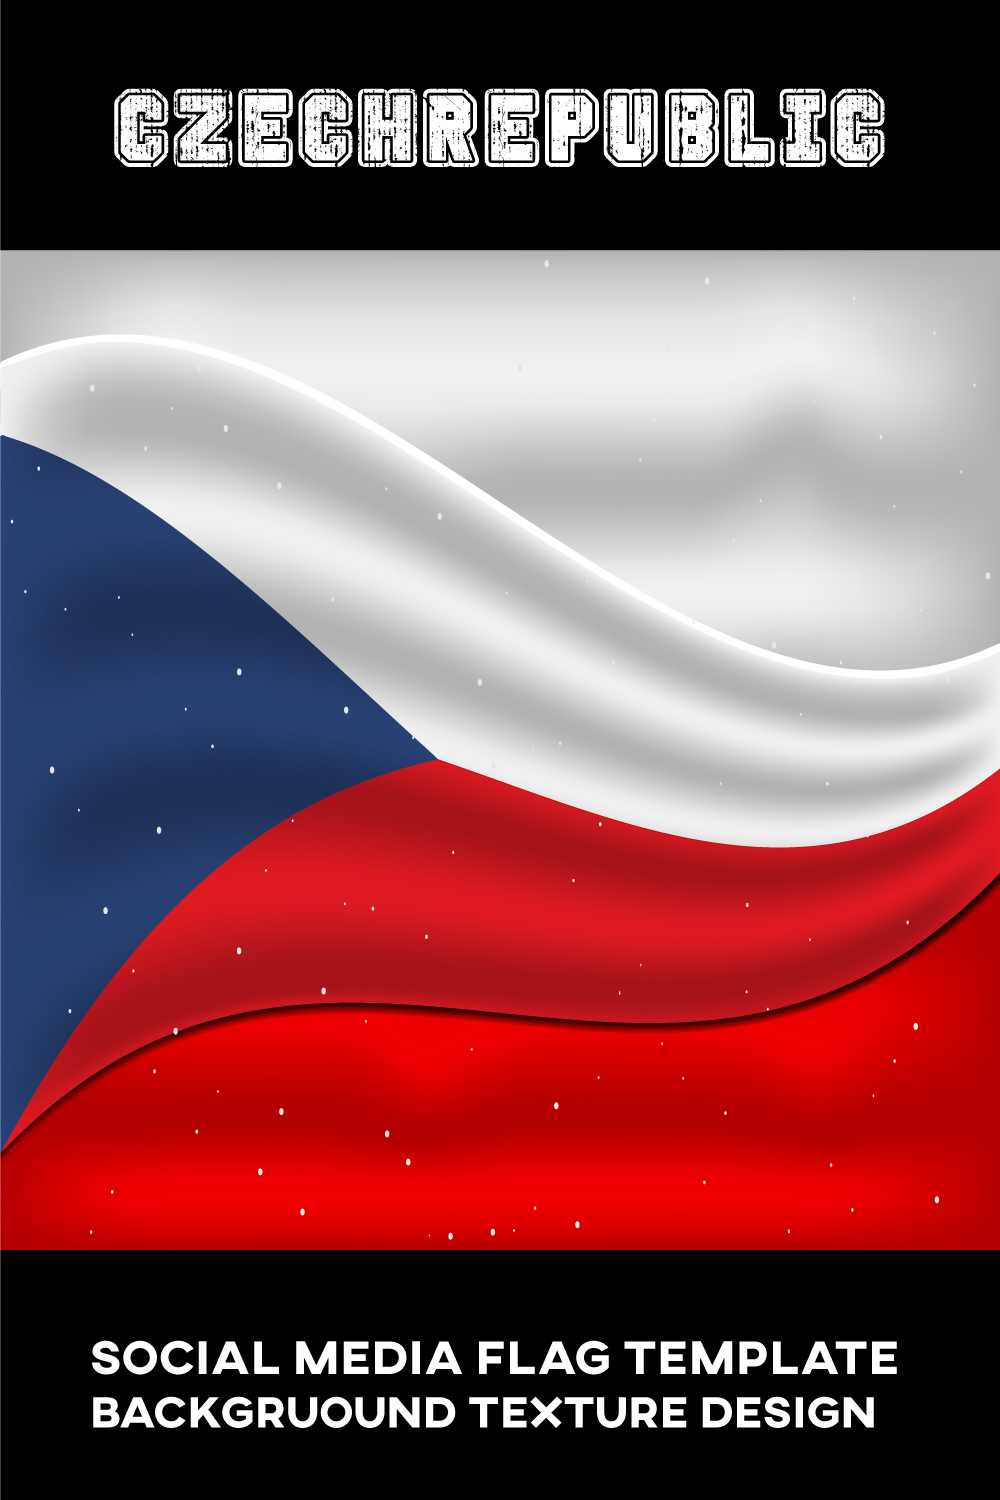 Amazing image of the flag of the Czech Republic.